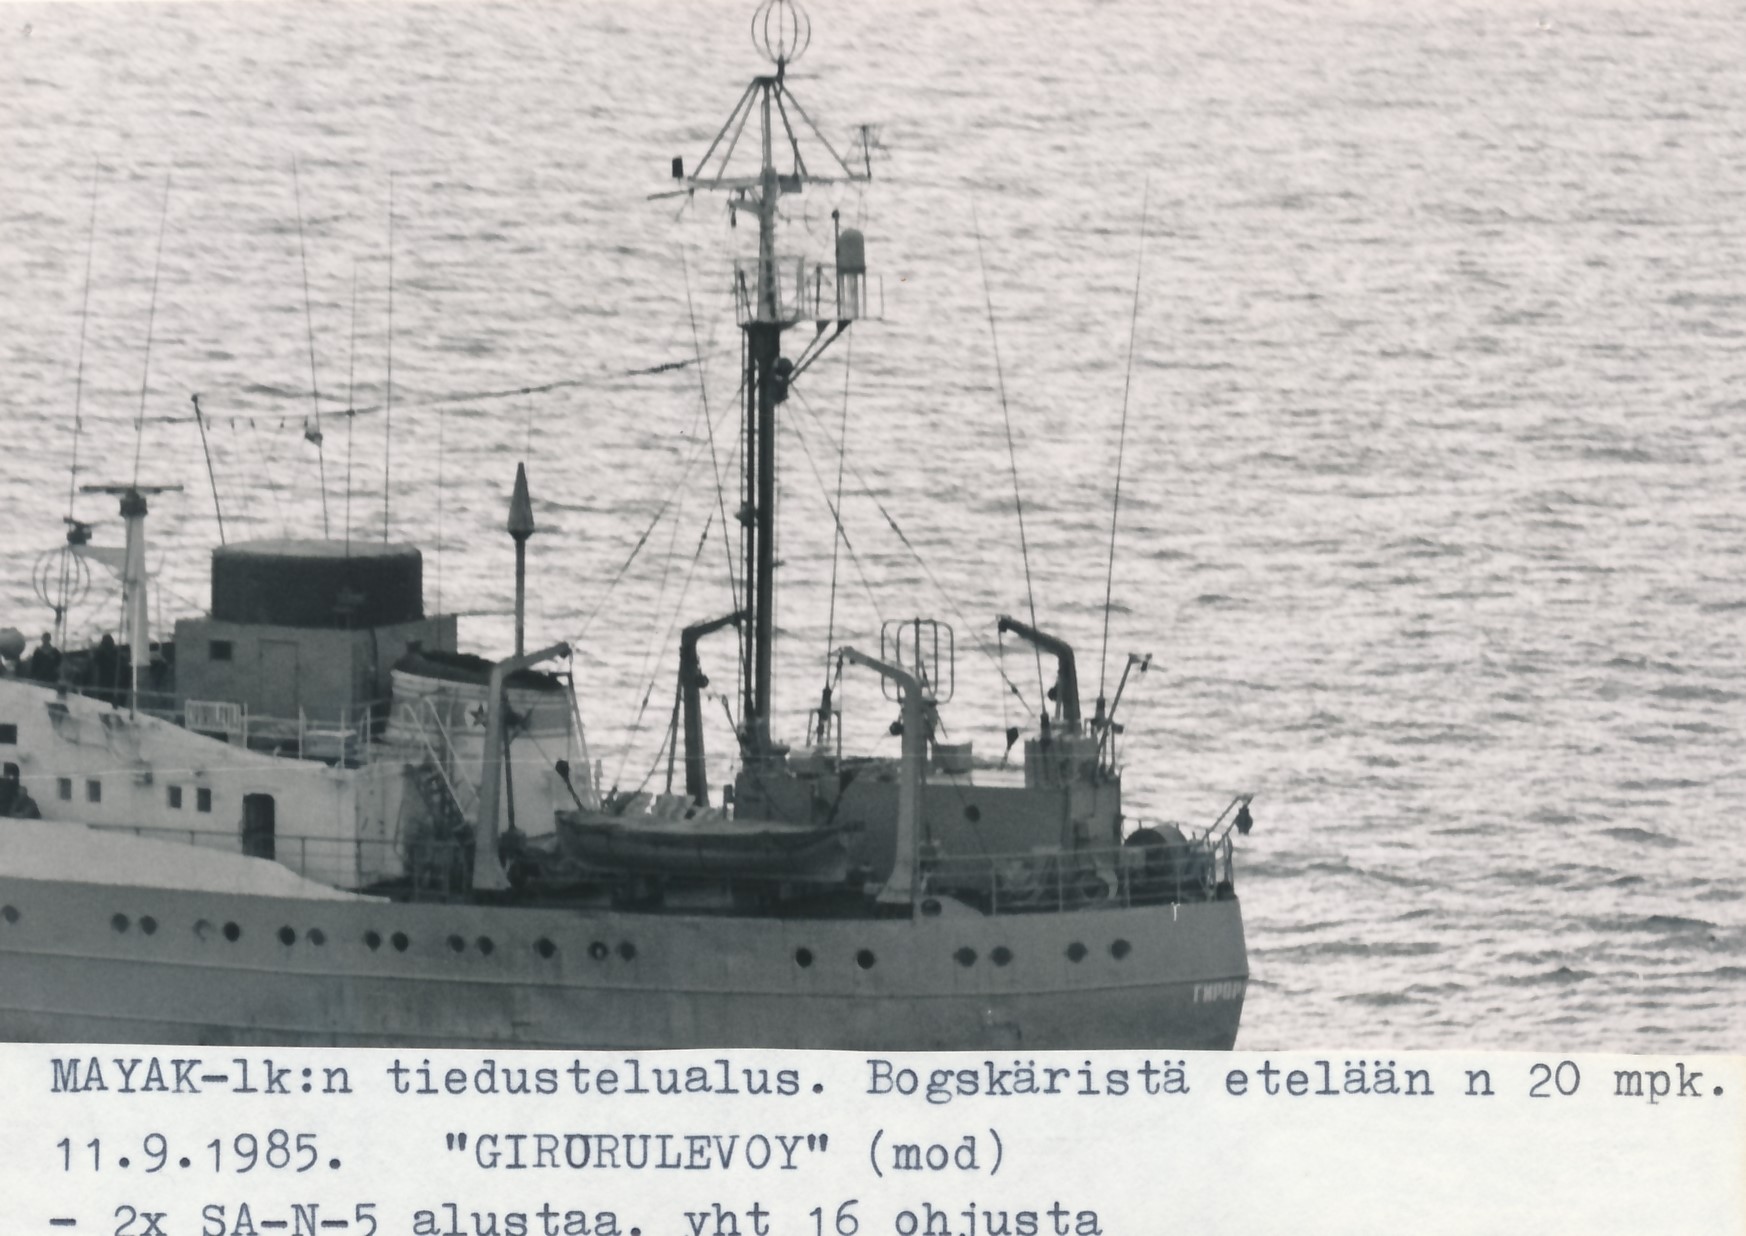 A Soviet intelligence vessel in the Baltic Sea, photographed from the air. The caption text is at the bottom of the image.